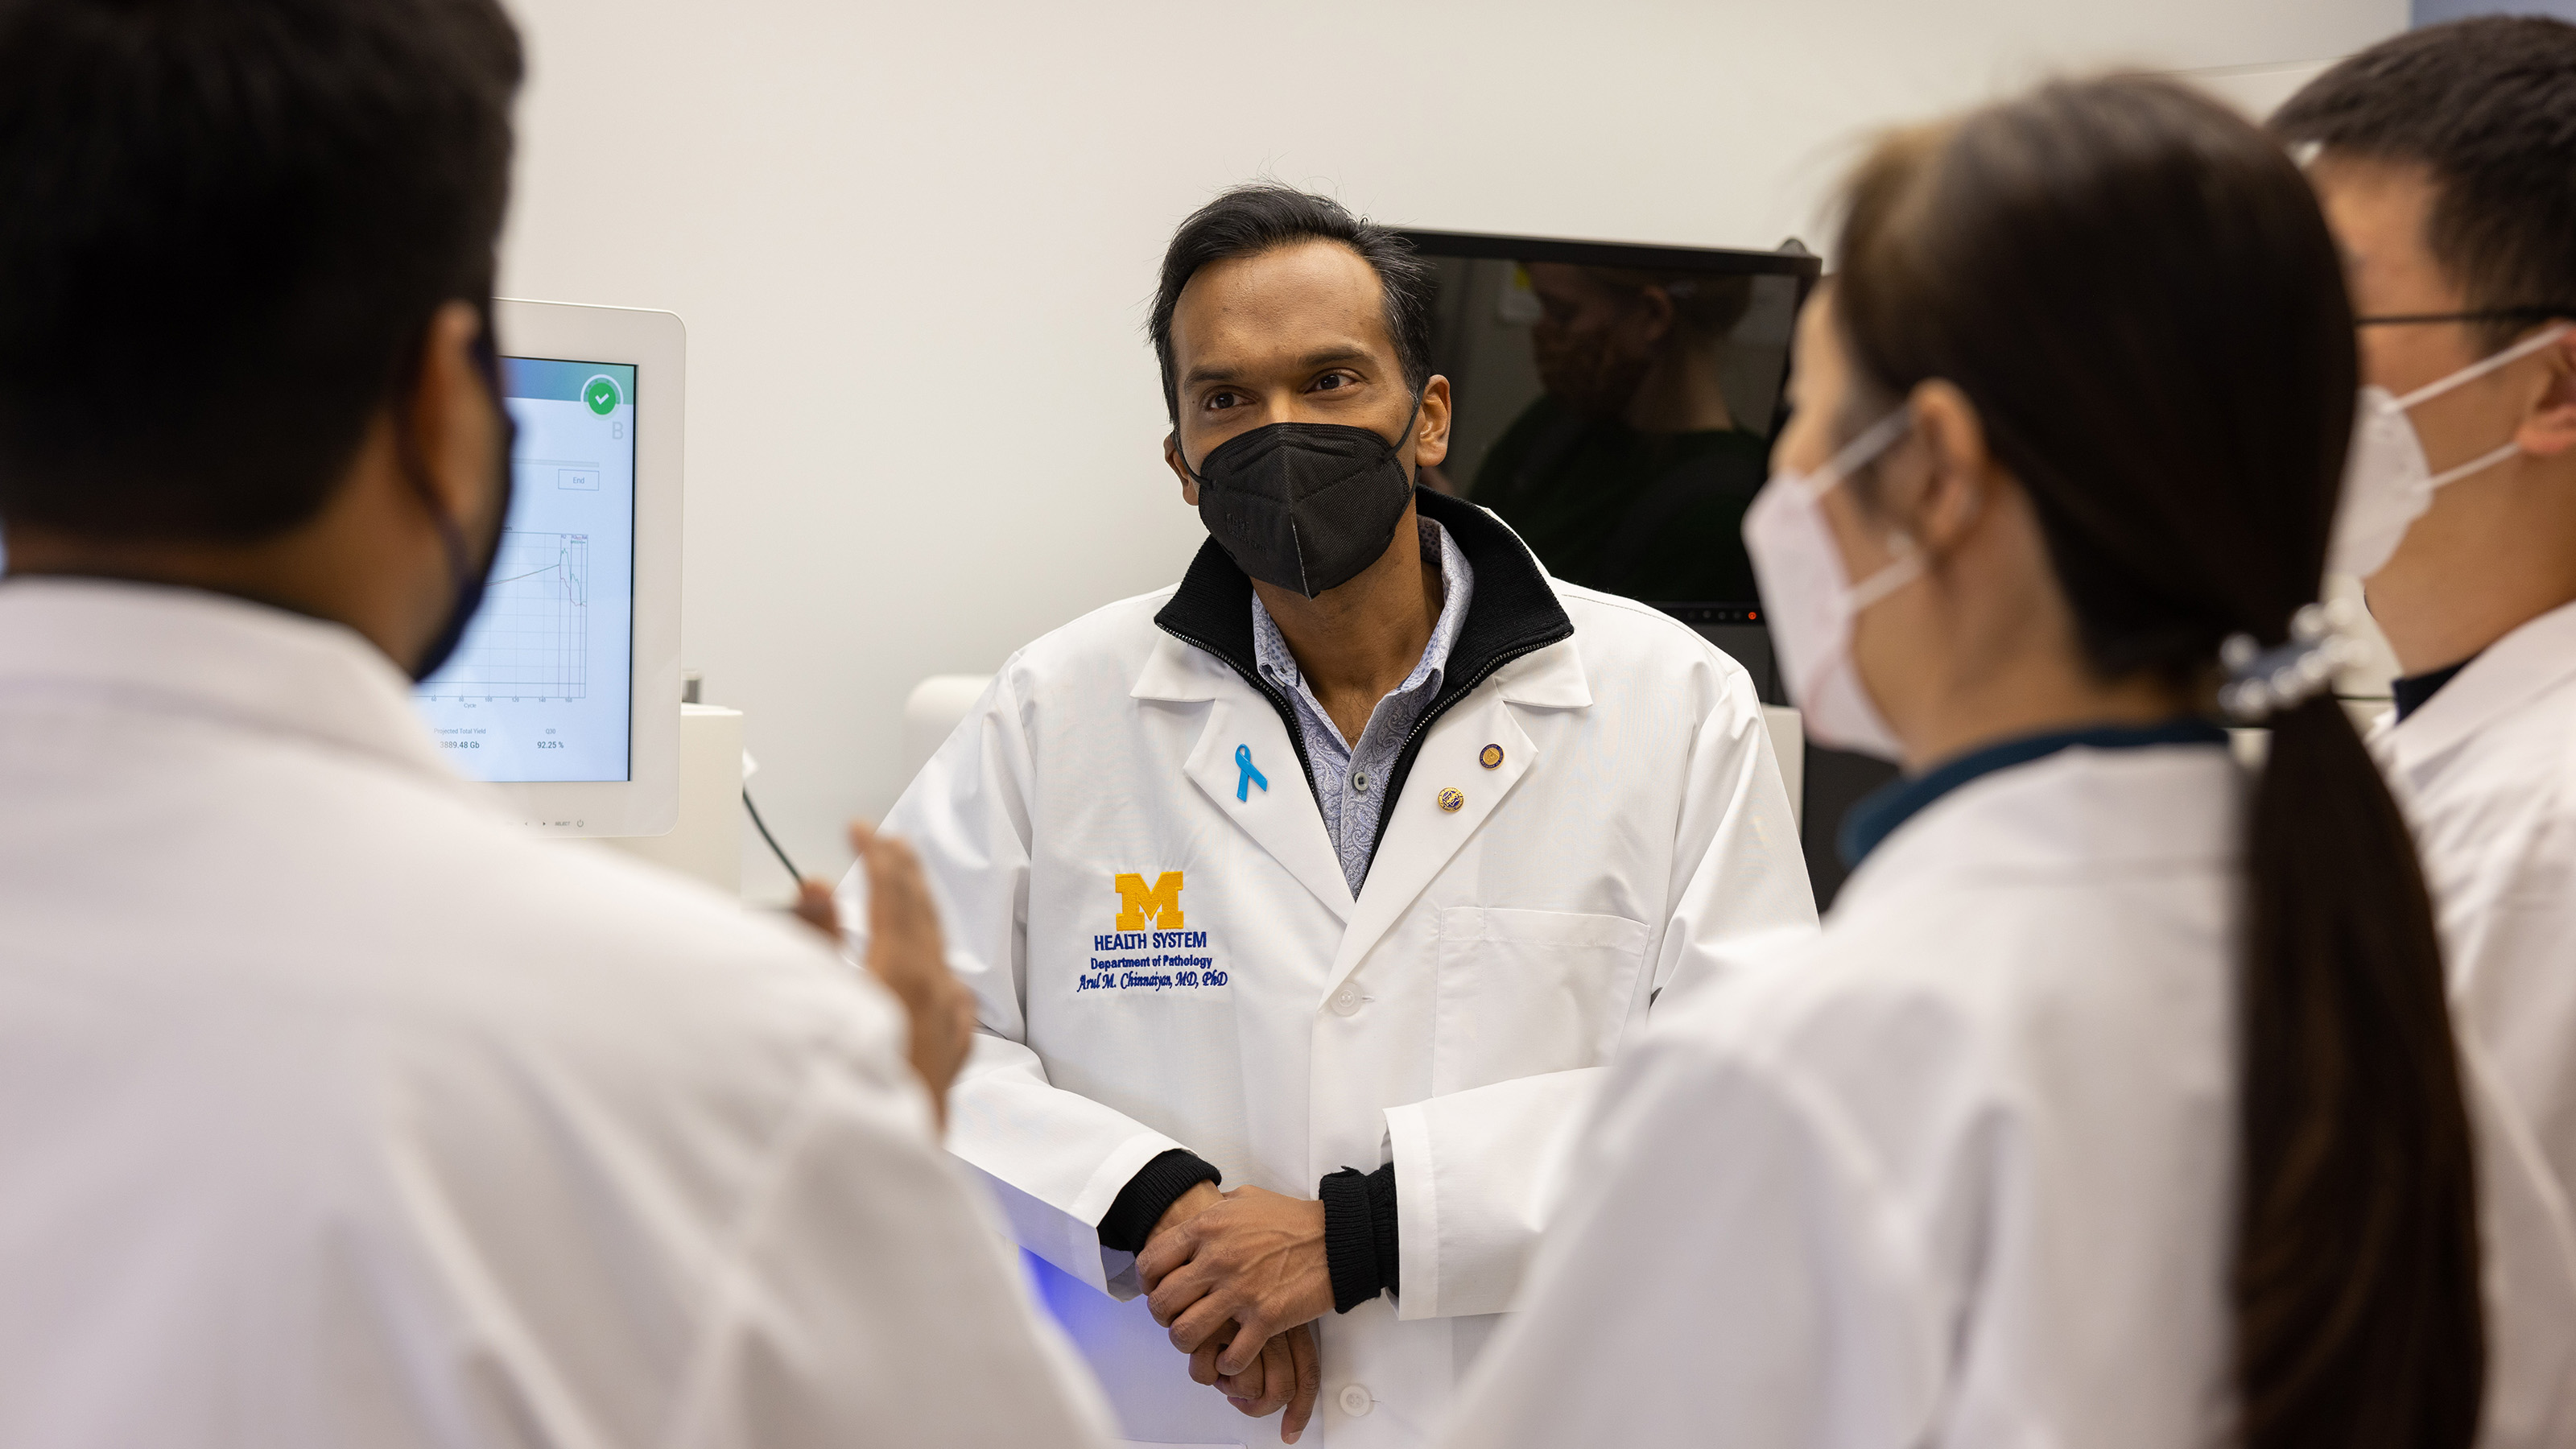 Dr. Chinnaiyan in the lab with colleagues. | Image provided by the Rogel Cancer Center.